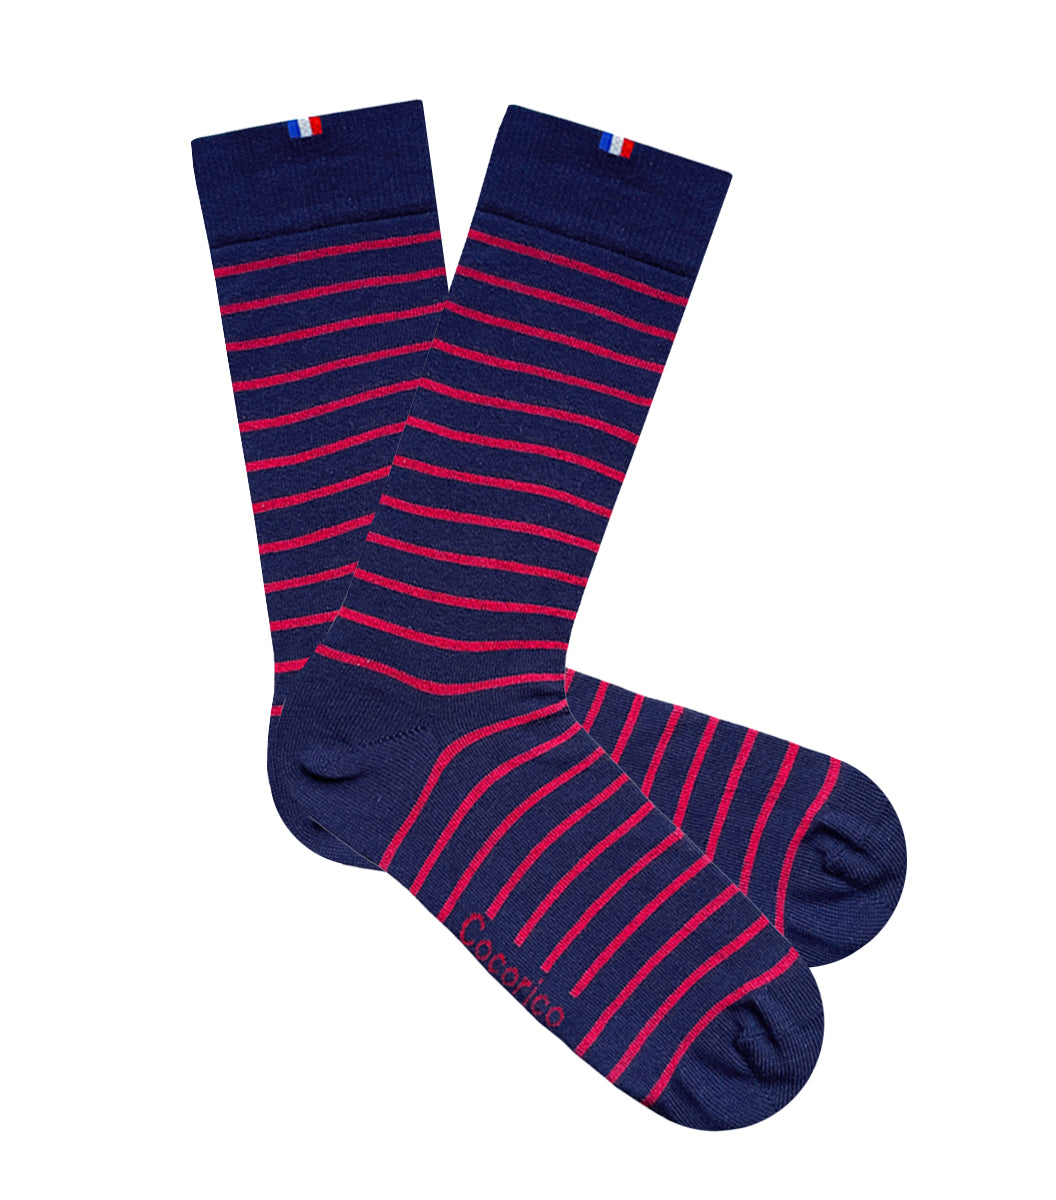 Chaussettes Homme Rayées Marine/Rouge